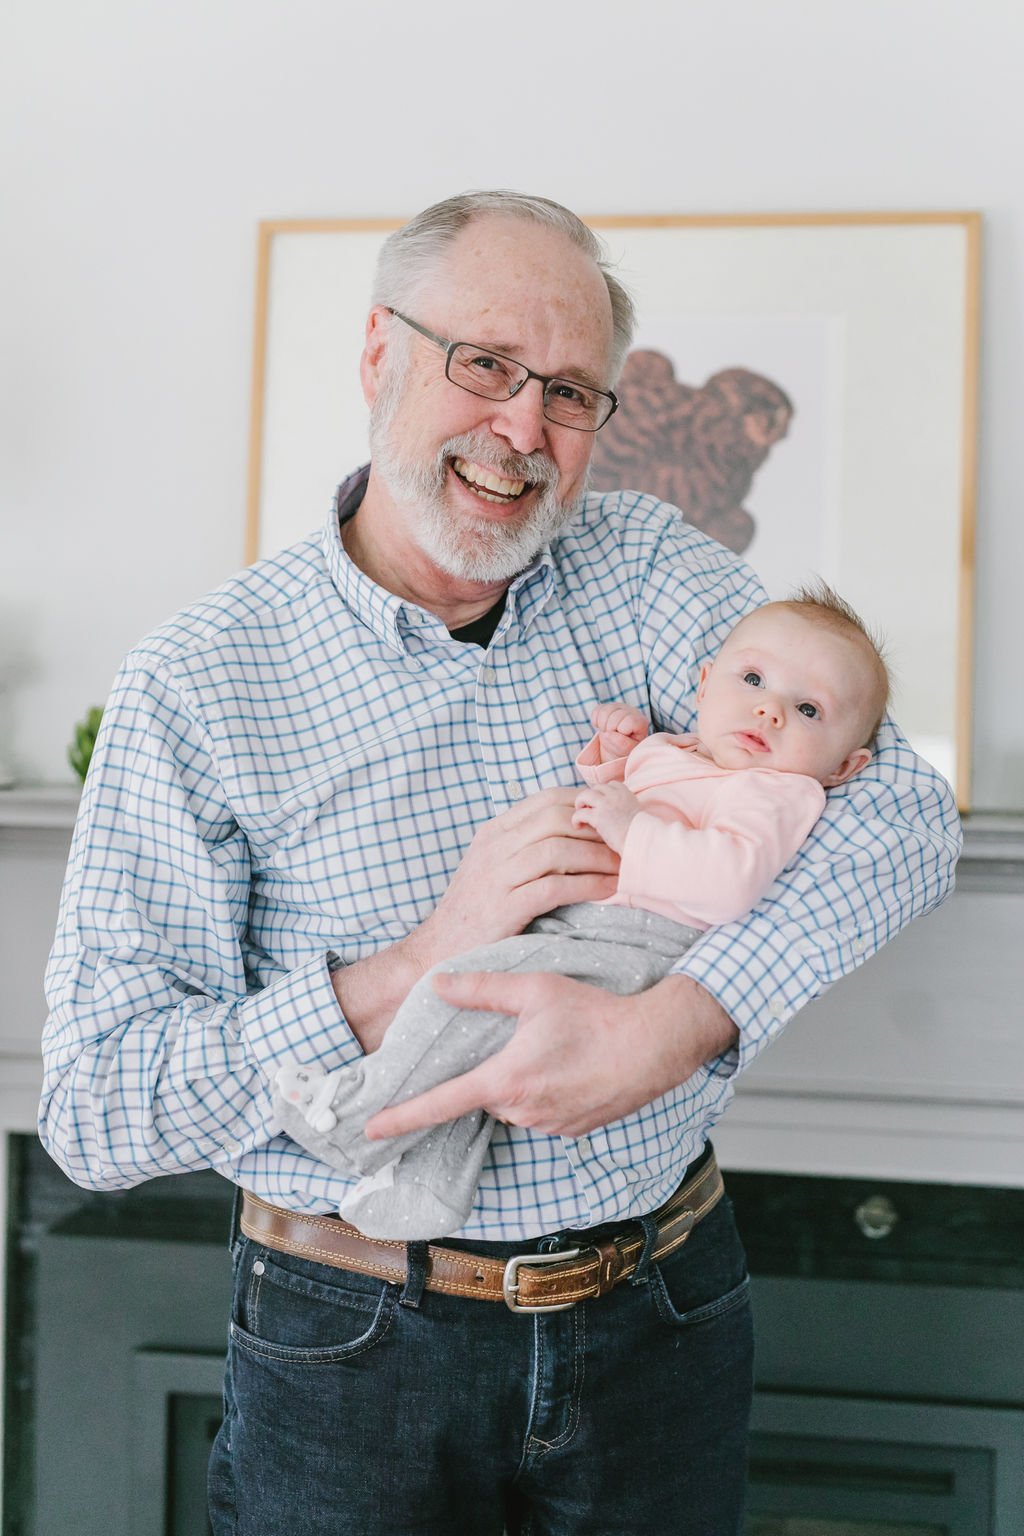 CarrFamilyPhotos2019-emily tebbetts photography-96multi-generational family session intergenerational extended family session documentary day in the life candid connecticut farm in home boston family photographer .jpg